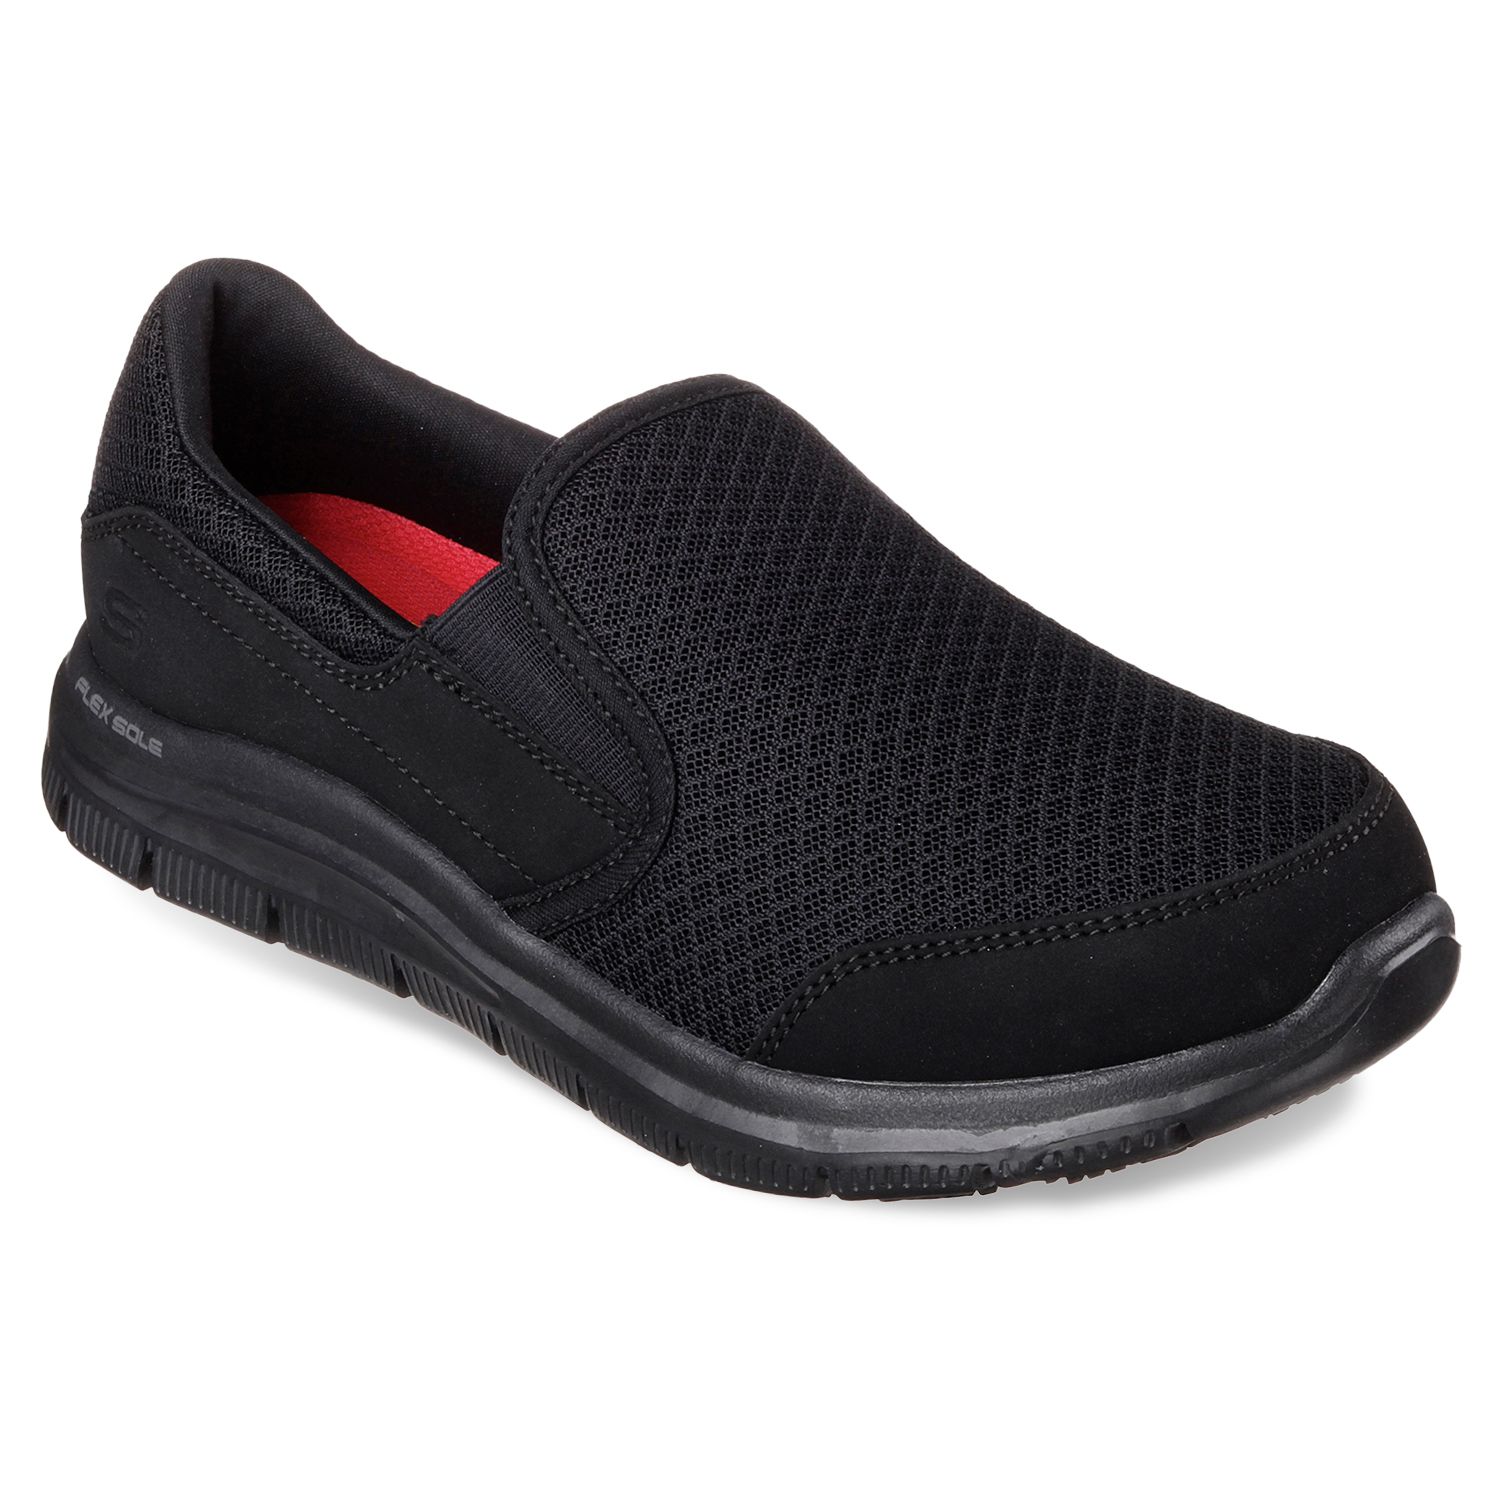 skechers relaxed fit slip on shoes